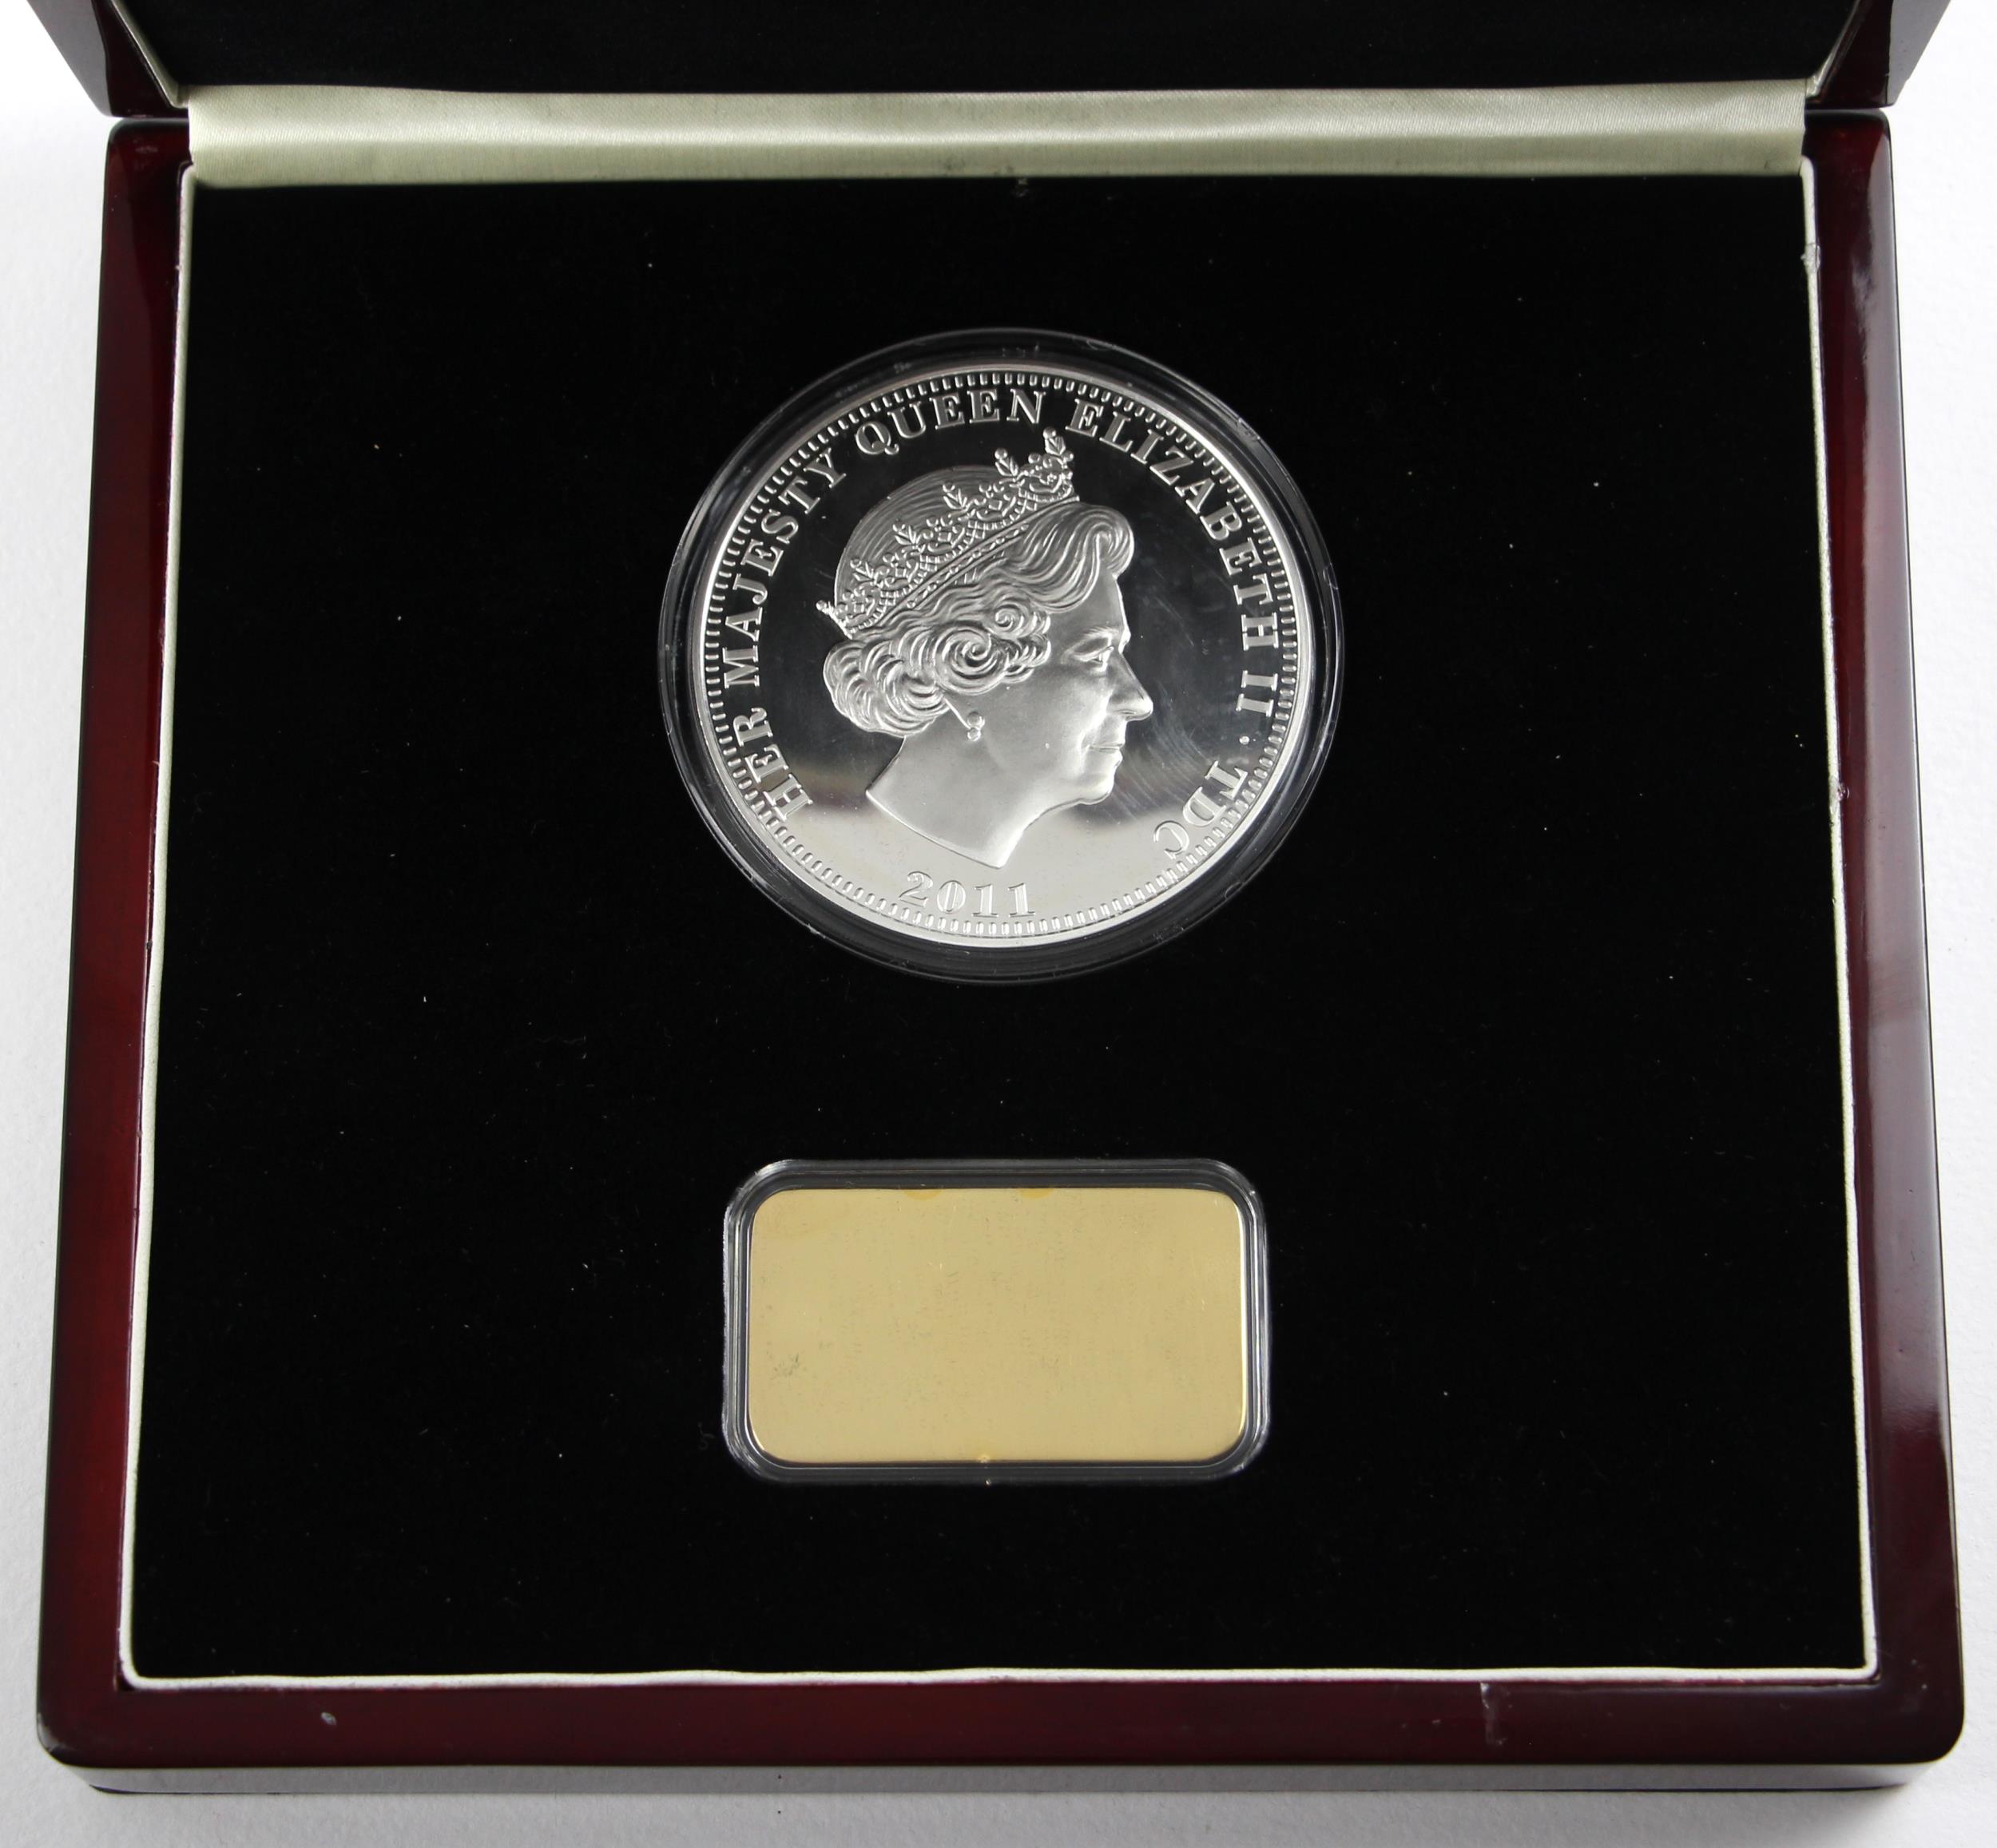 Elizabeth II (1952-2022), The Largest and Purest Year of Three Kings silver Coin, 2011, Proof, no. - Image 2 of 5